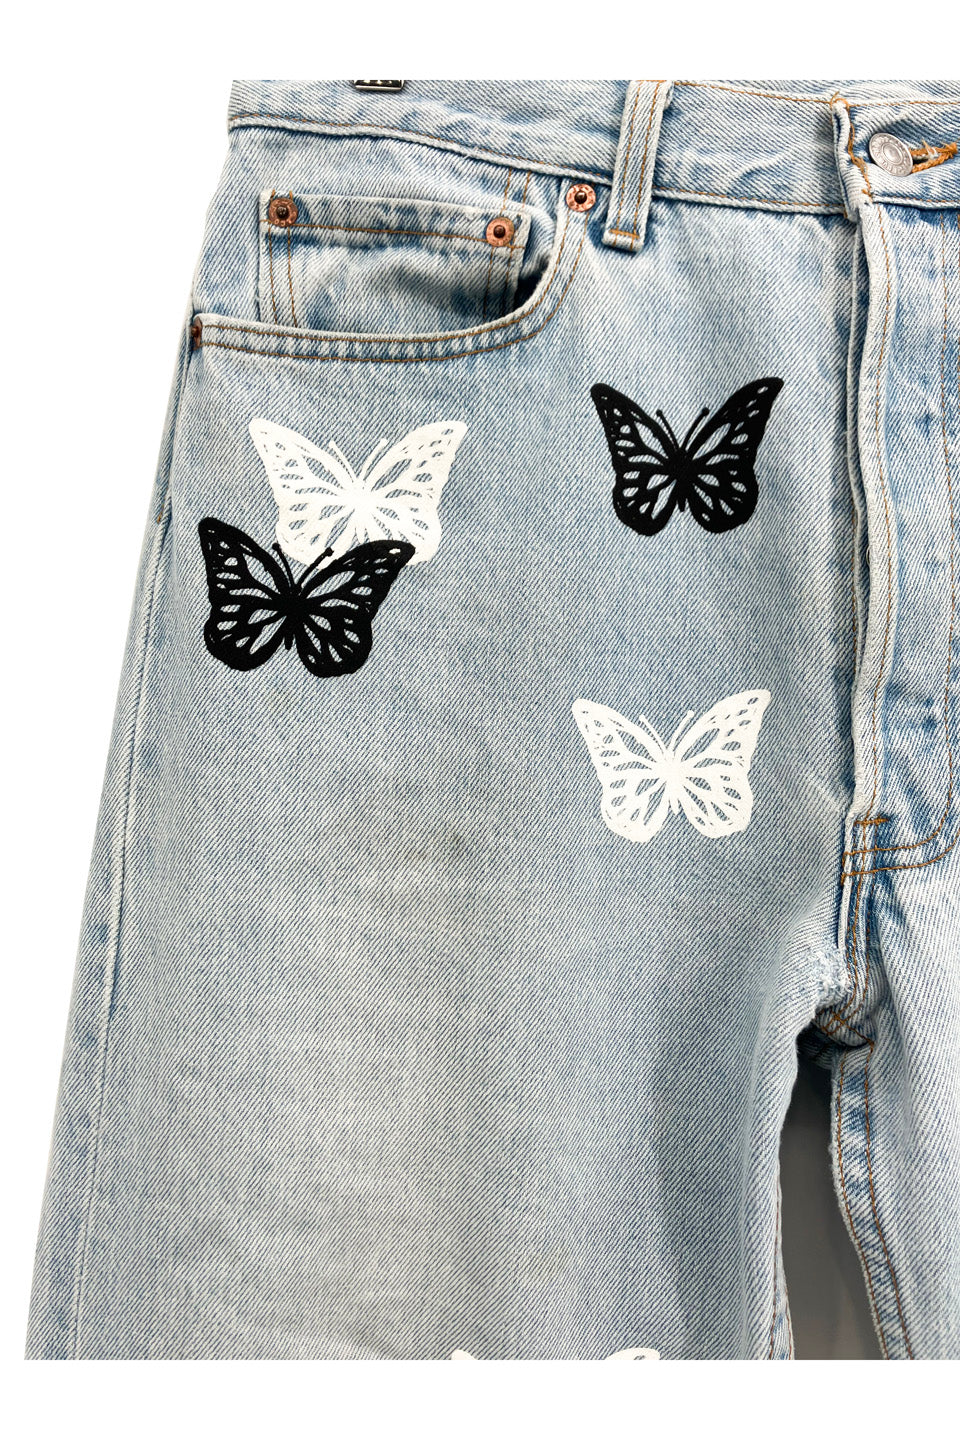 About Dreams x Levi's 501 Butterfly Denim – Luciall